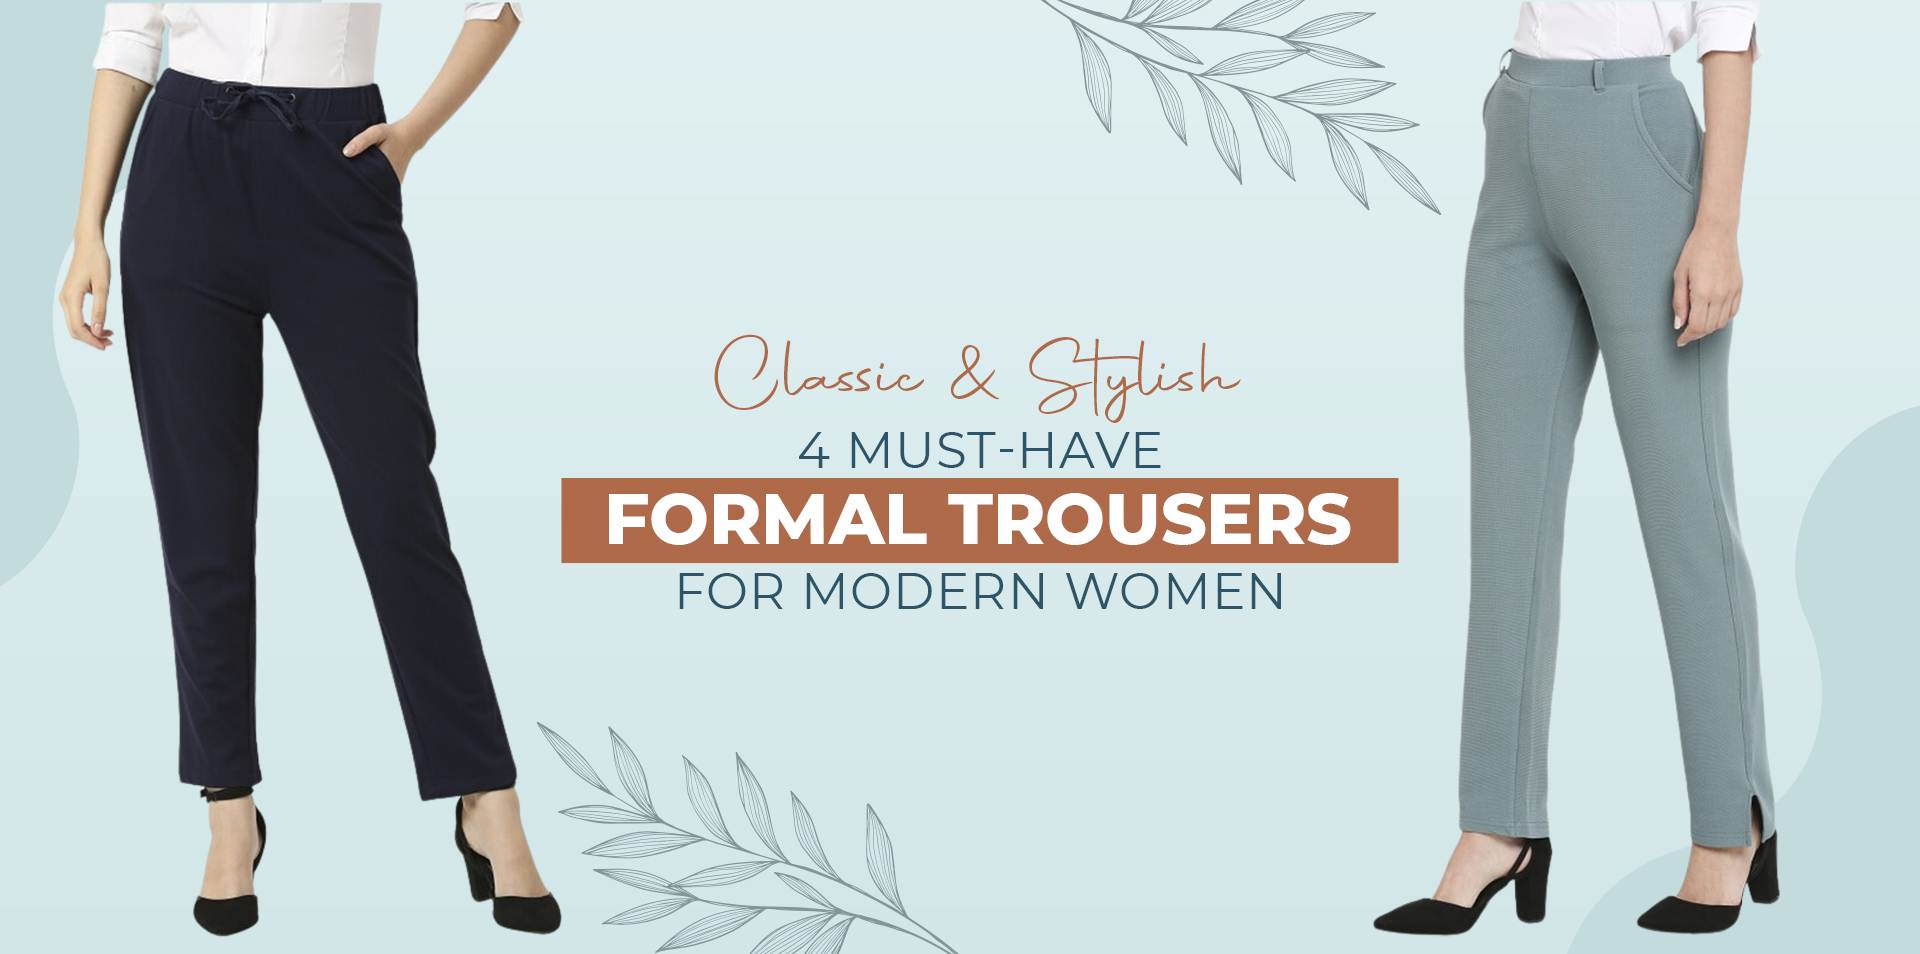 Classic & Stylish: 4 Must-Have Formal Trousers for Modern Women